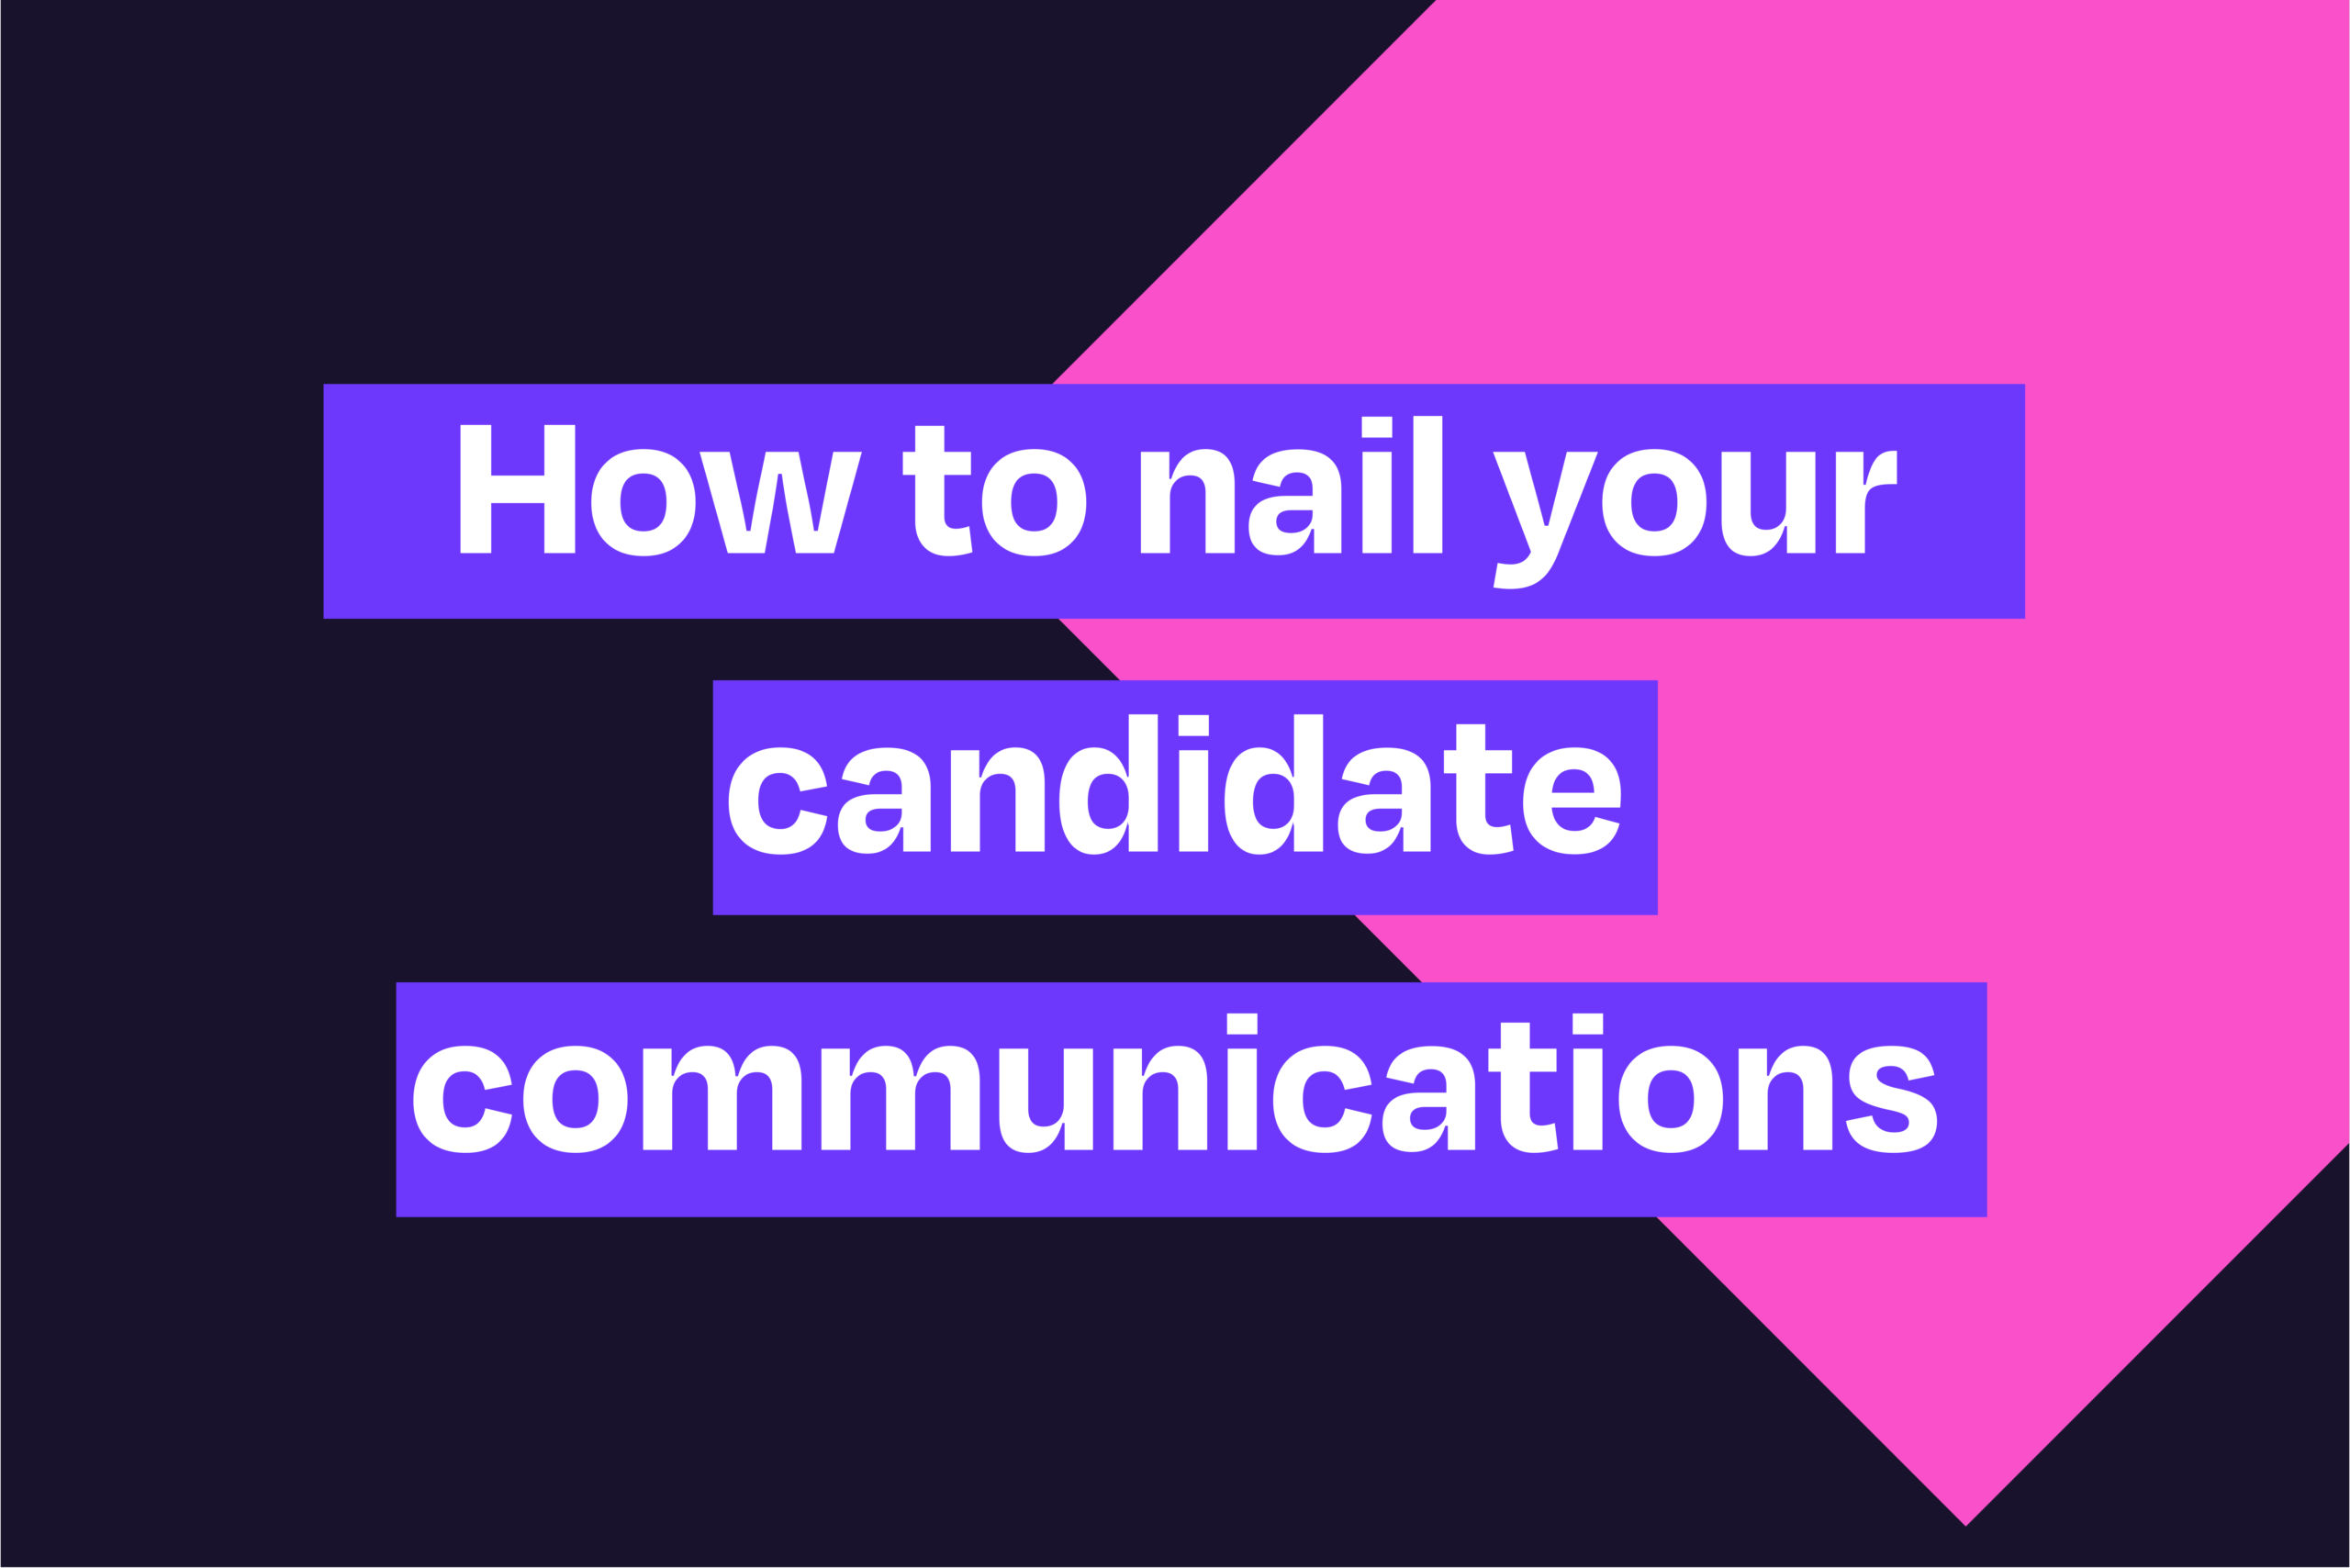 Title decorative Image of "How to nail your candidate communications"